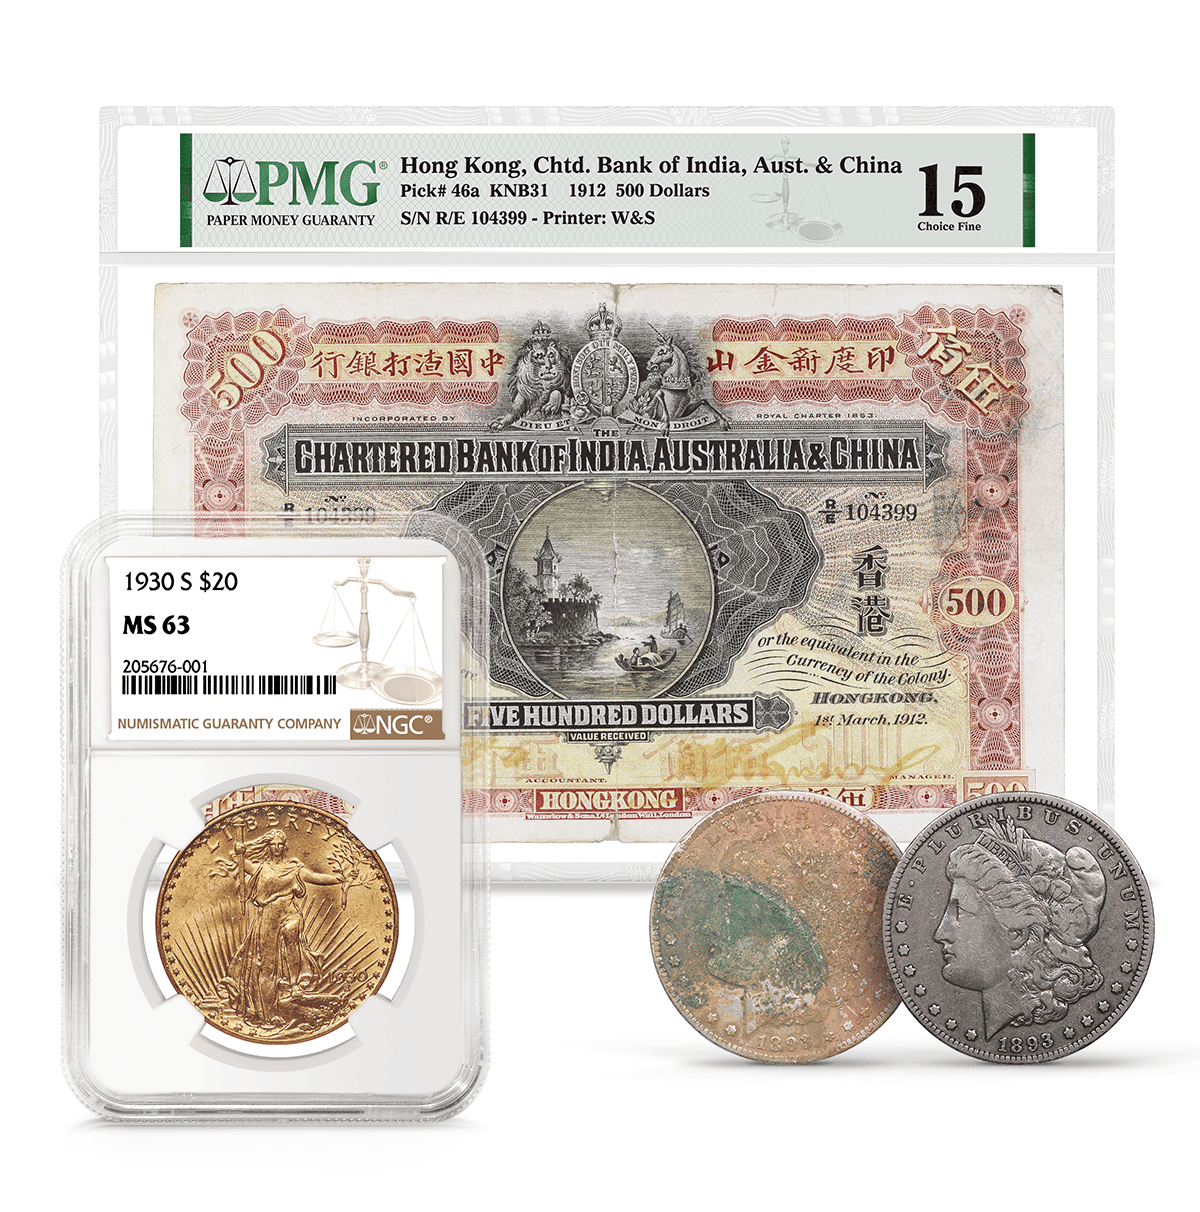 Collectibles in NGC and PMG Holders